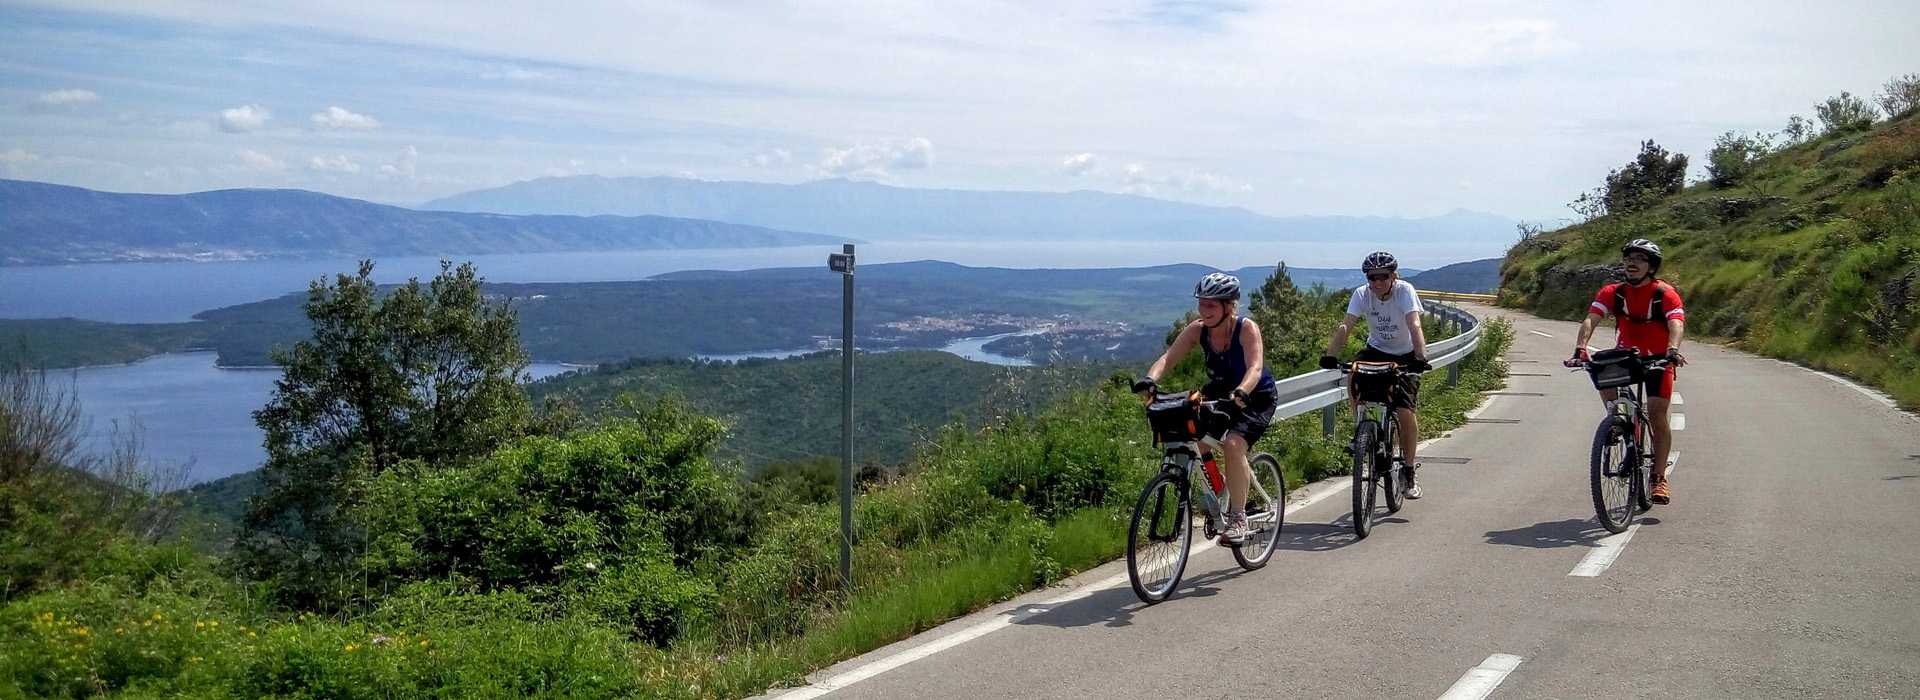 Cycling on the Dalmatian Coast guided holiday - Road Old Town - Brusje, Hvar